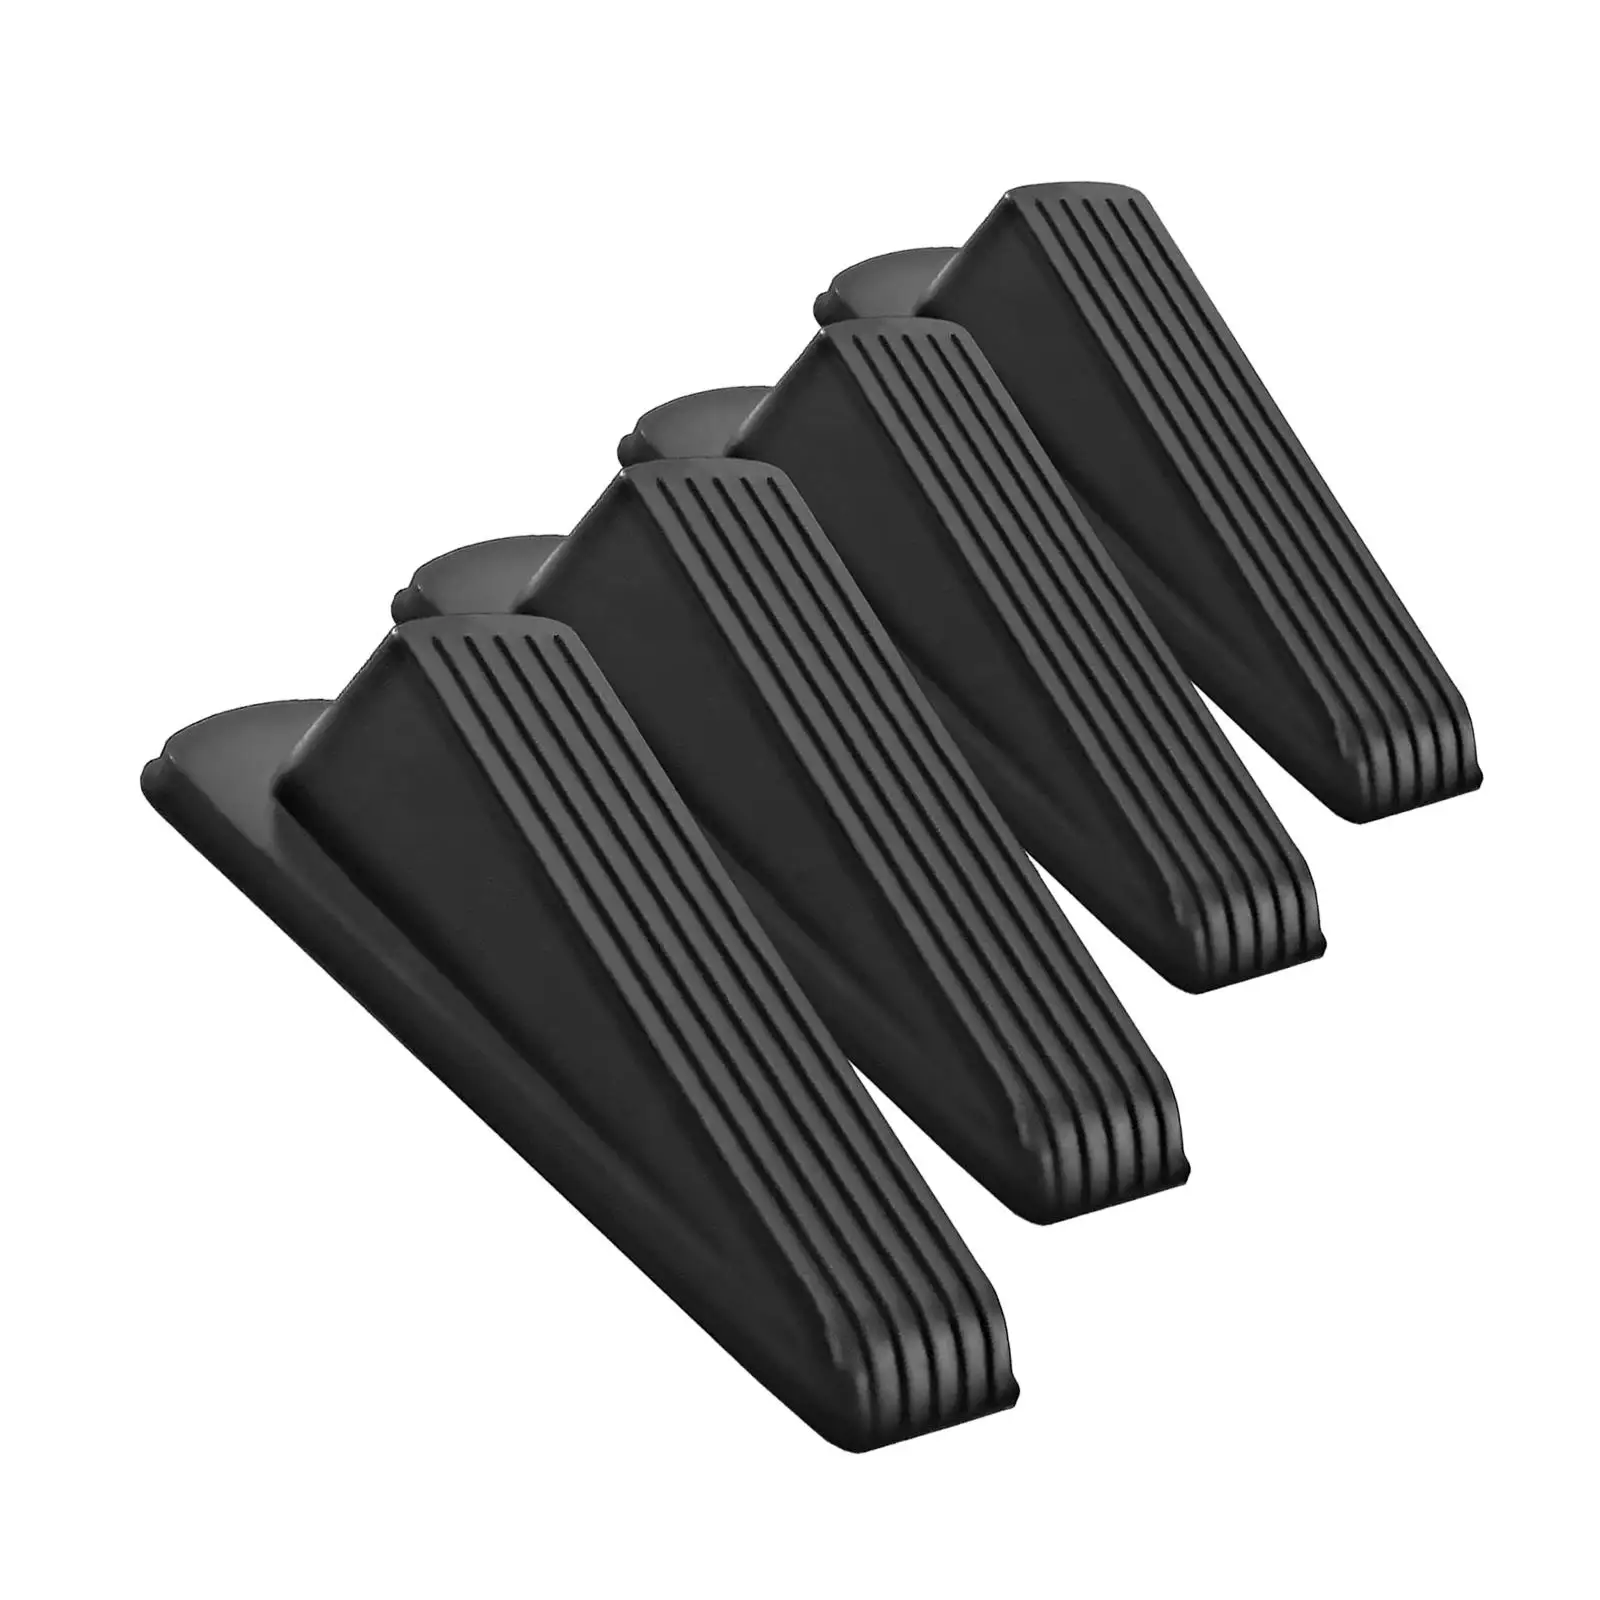 4x Rubber Door Stopper Protection Non Slip Anti Pinch Wedge Door Stop for Office Kitchen Hotel Commercial Residential